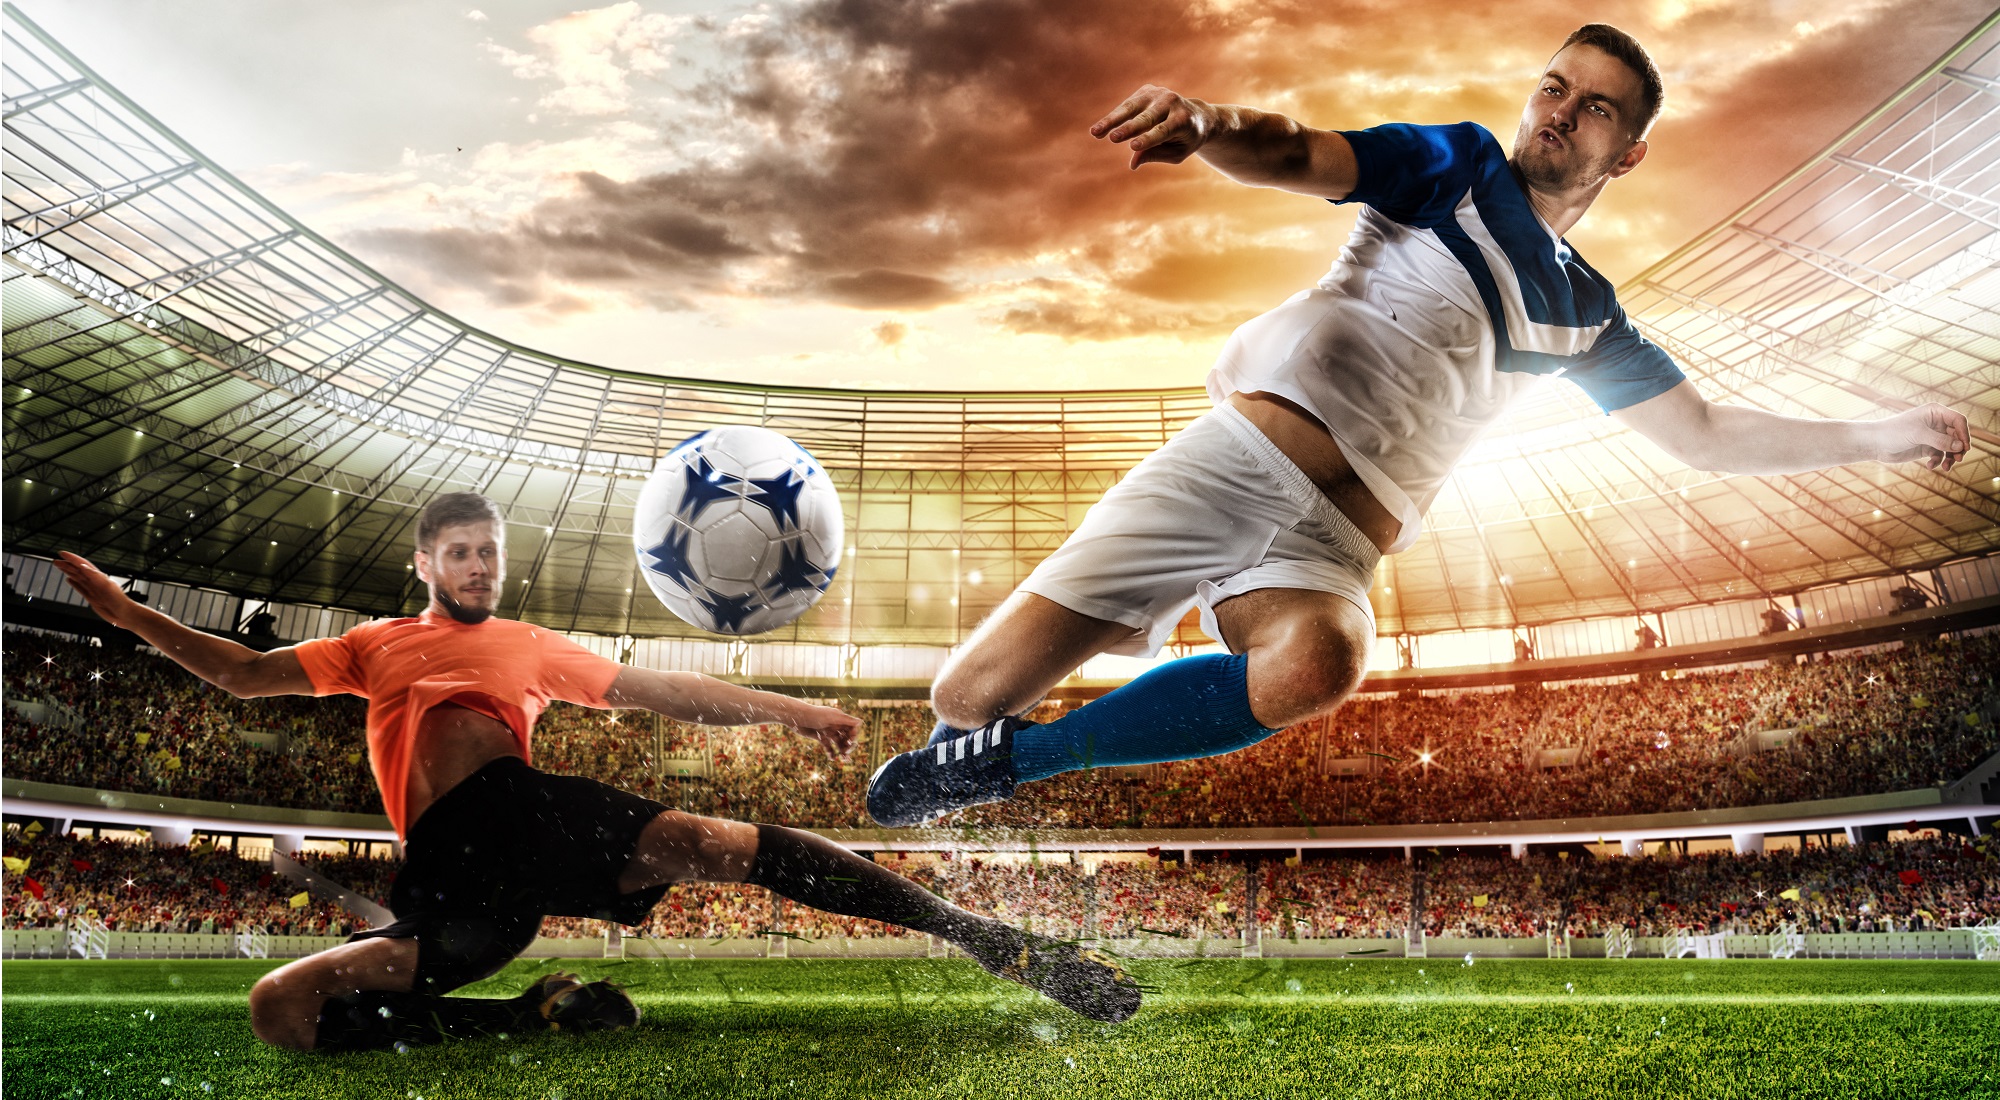 TotalSportek: Your Gateway to the World of Sports